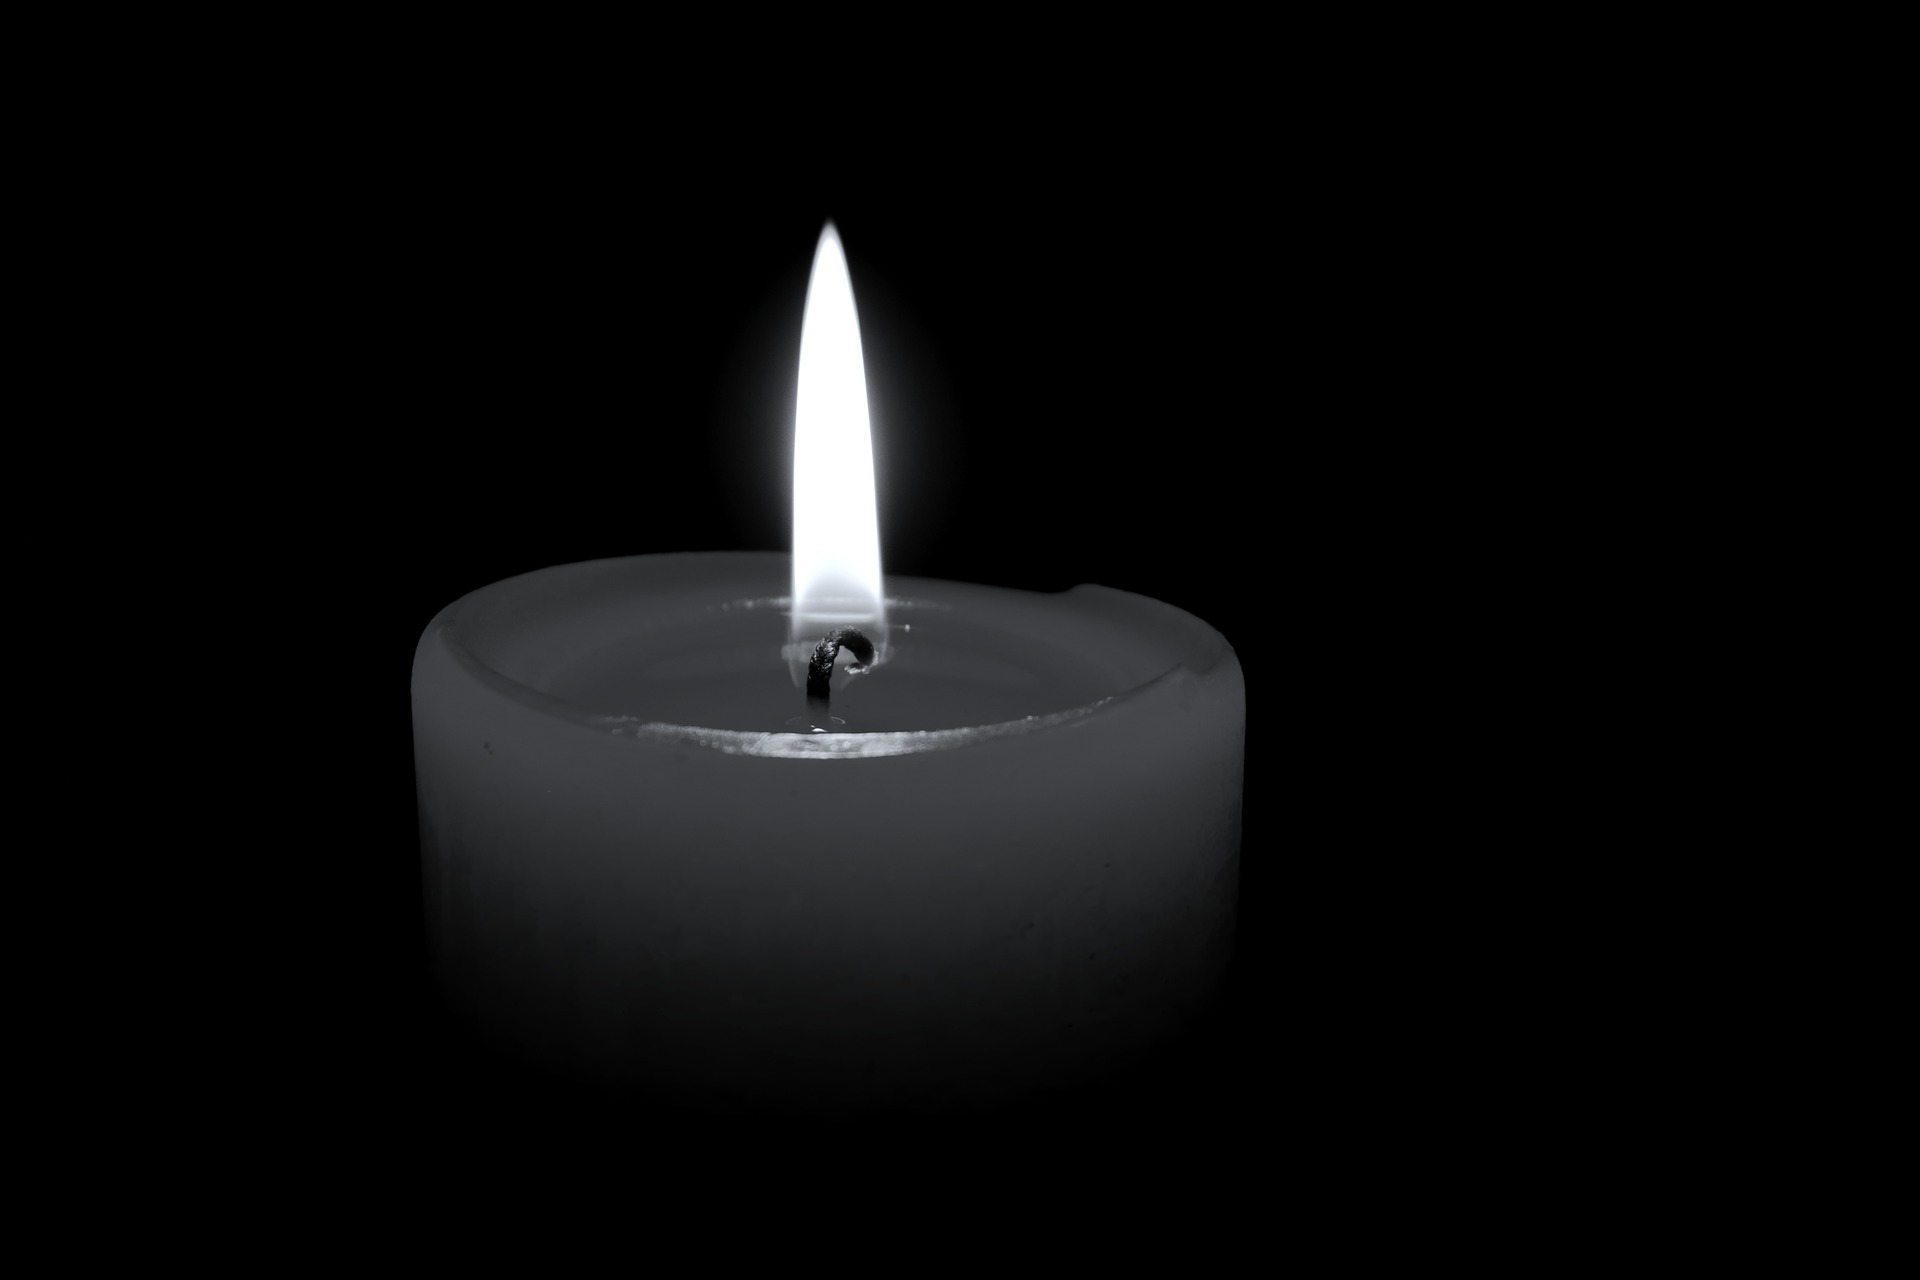 candle-g477a49ff4_1920